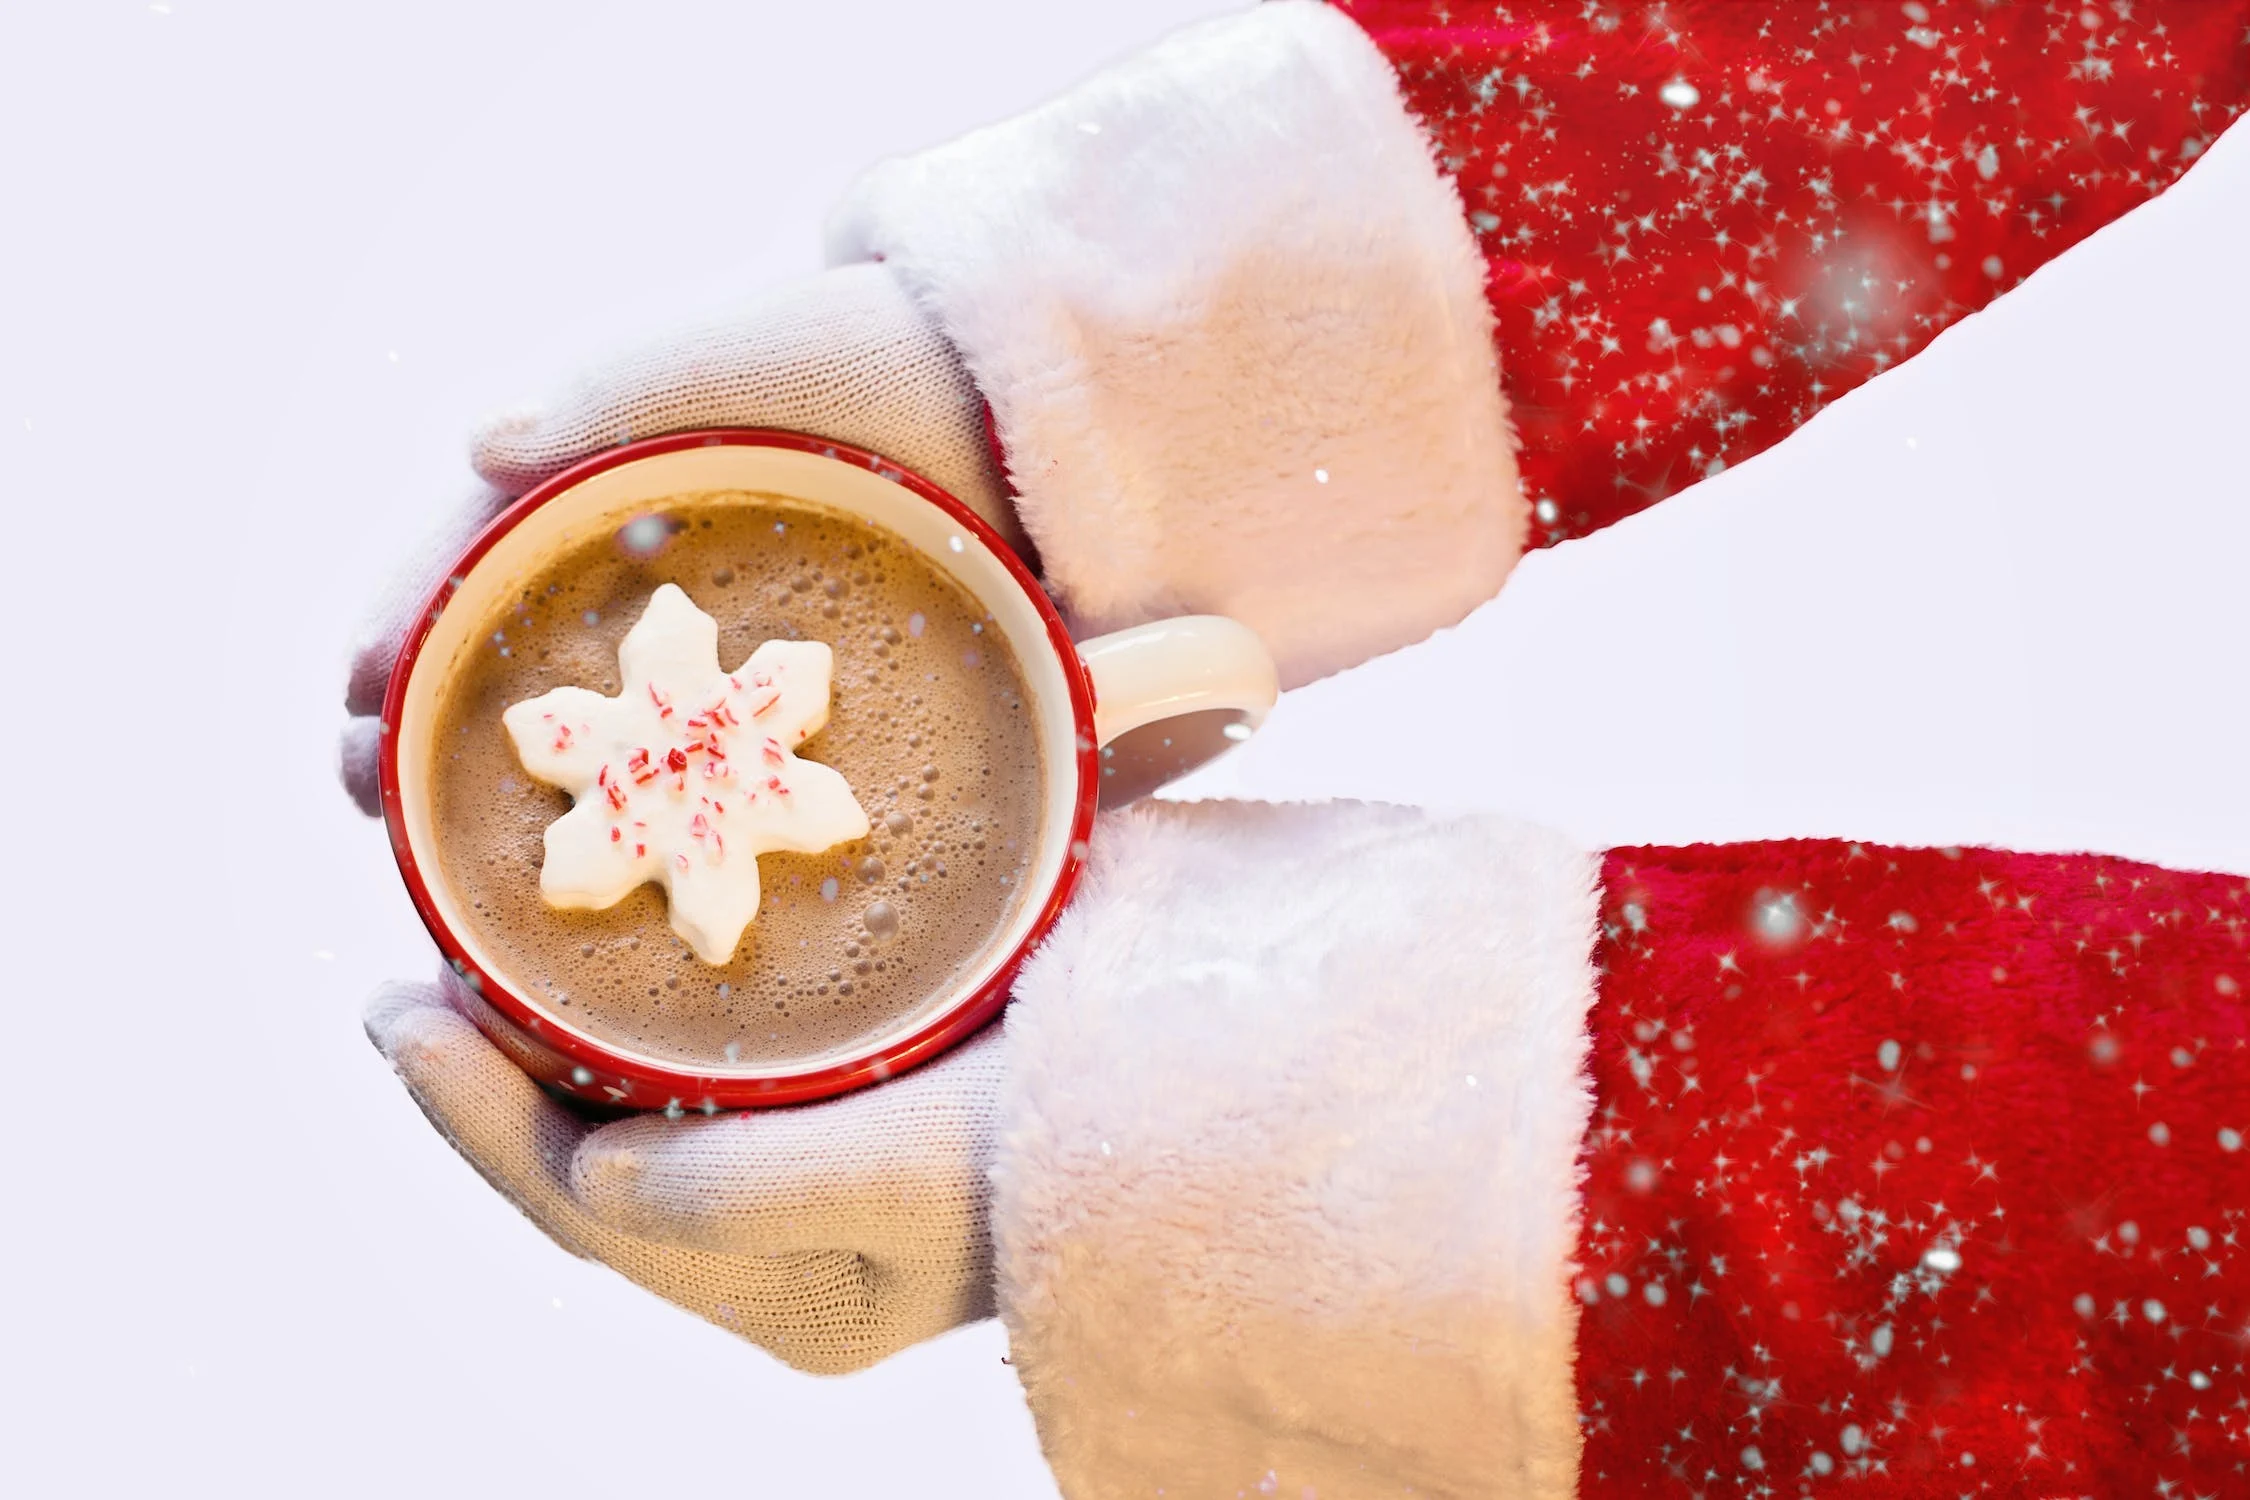 Santa's hands holding a cup for hot cocoa with a white flake cookie in it